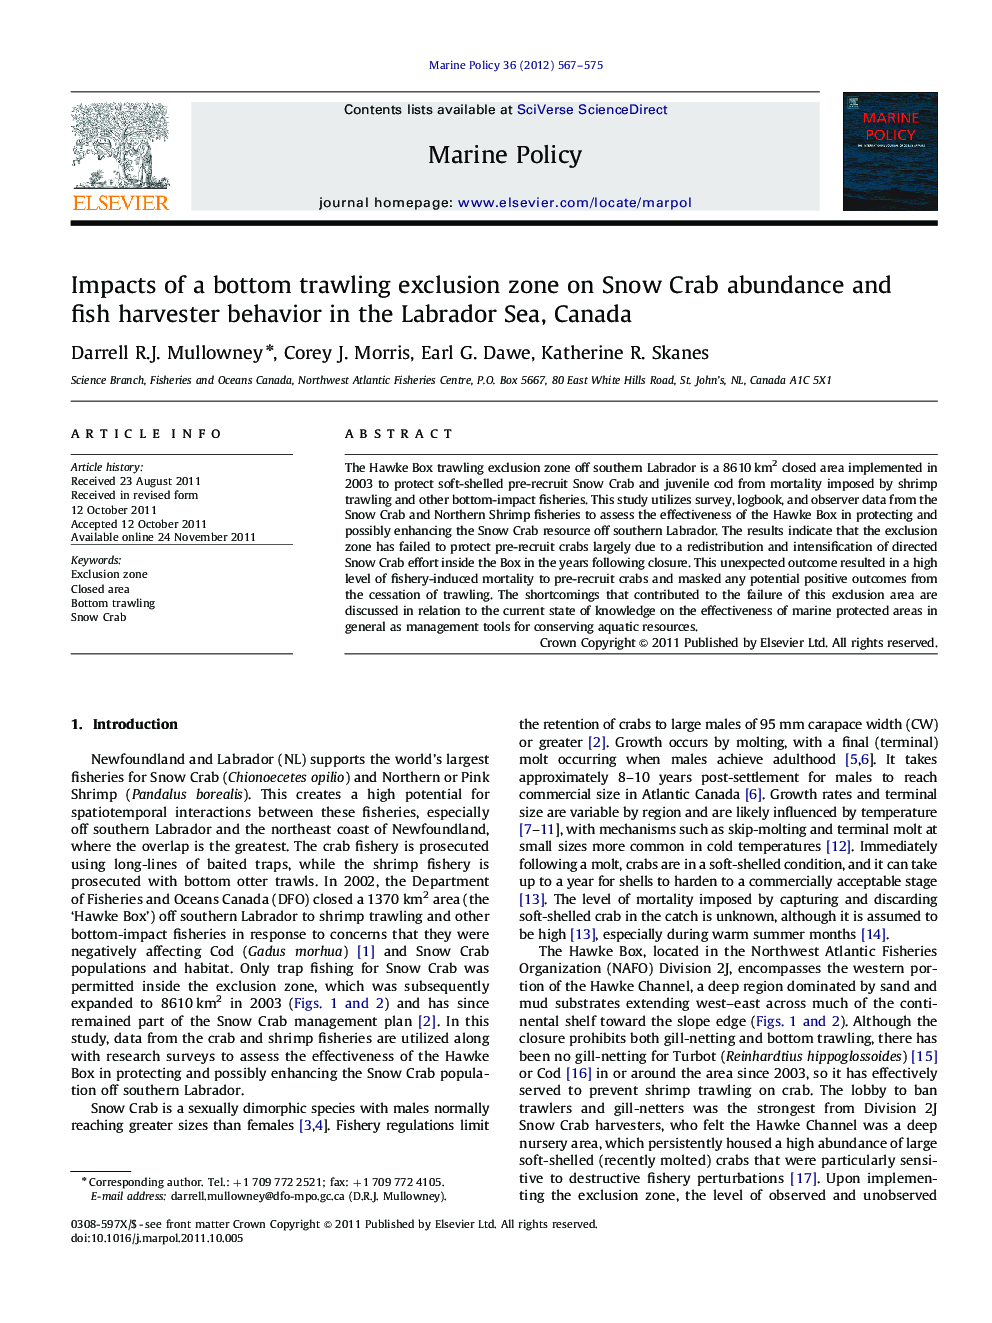 Impacts of a bottom trawling exclusion zone on Snow Crab abundance and fish harvester behavior in the Labrador Sea, Canada